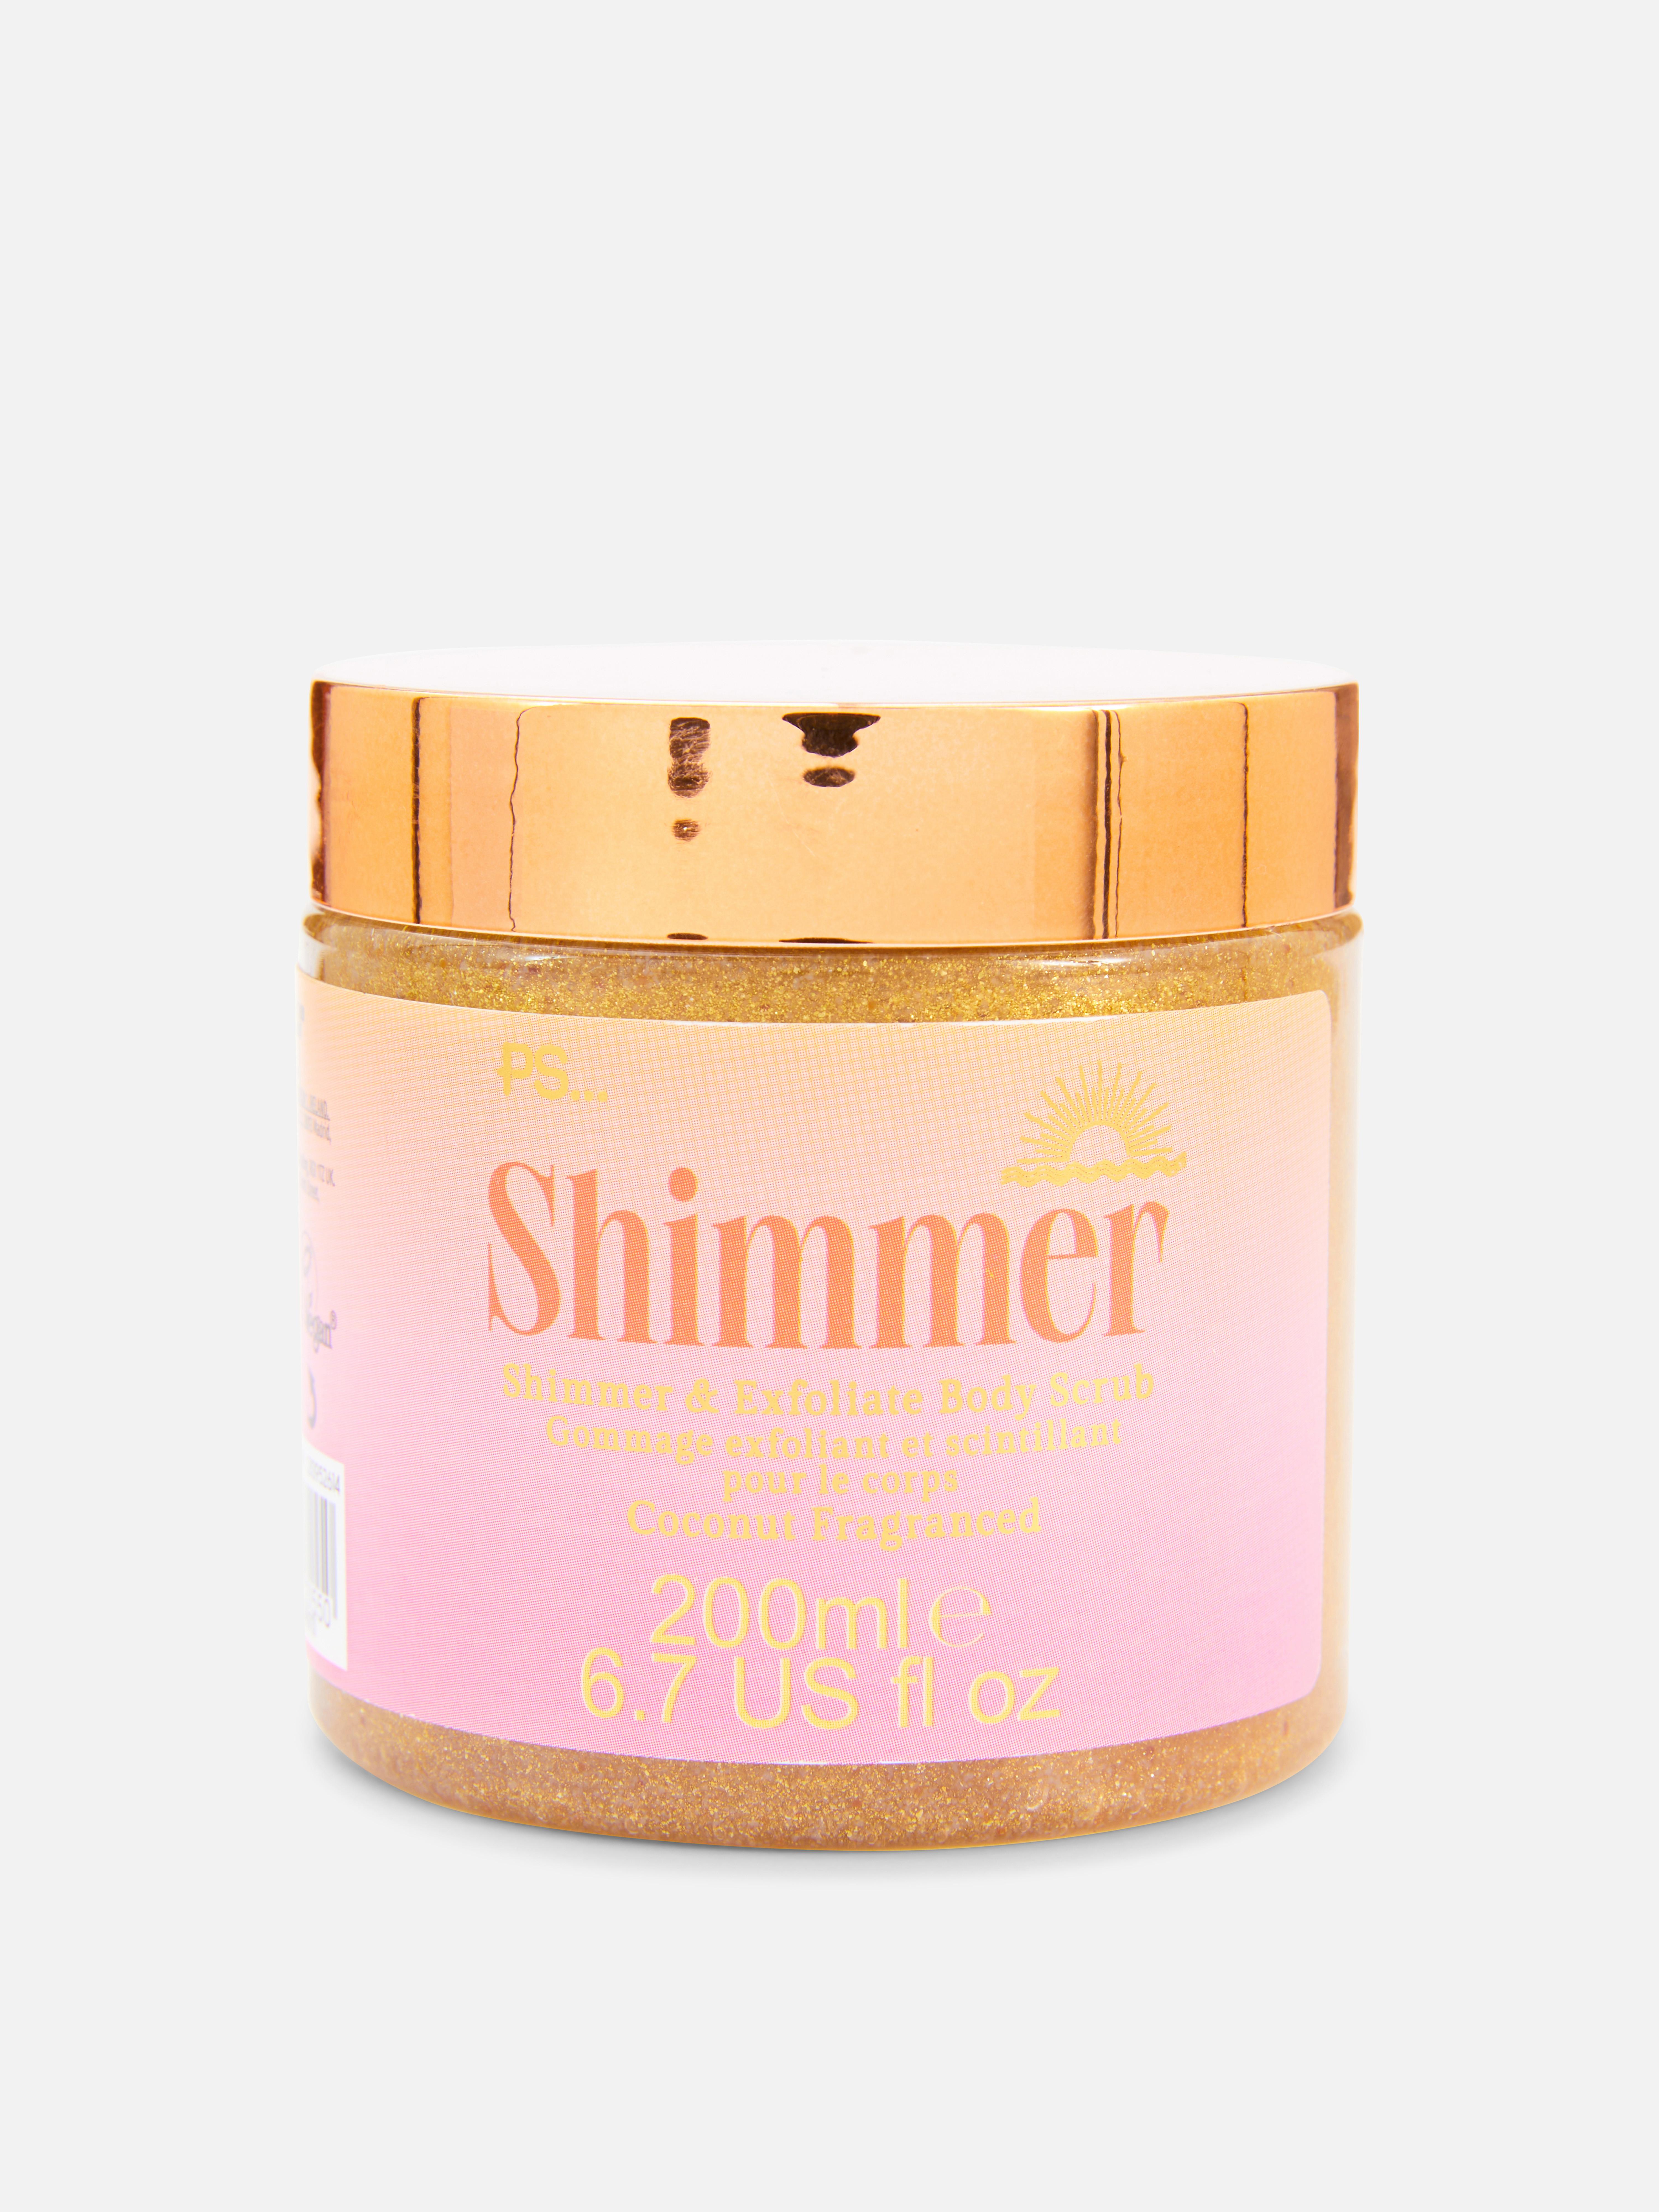 PS... Shimmer and Exfoliate Body Scrub